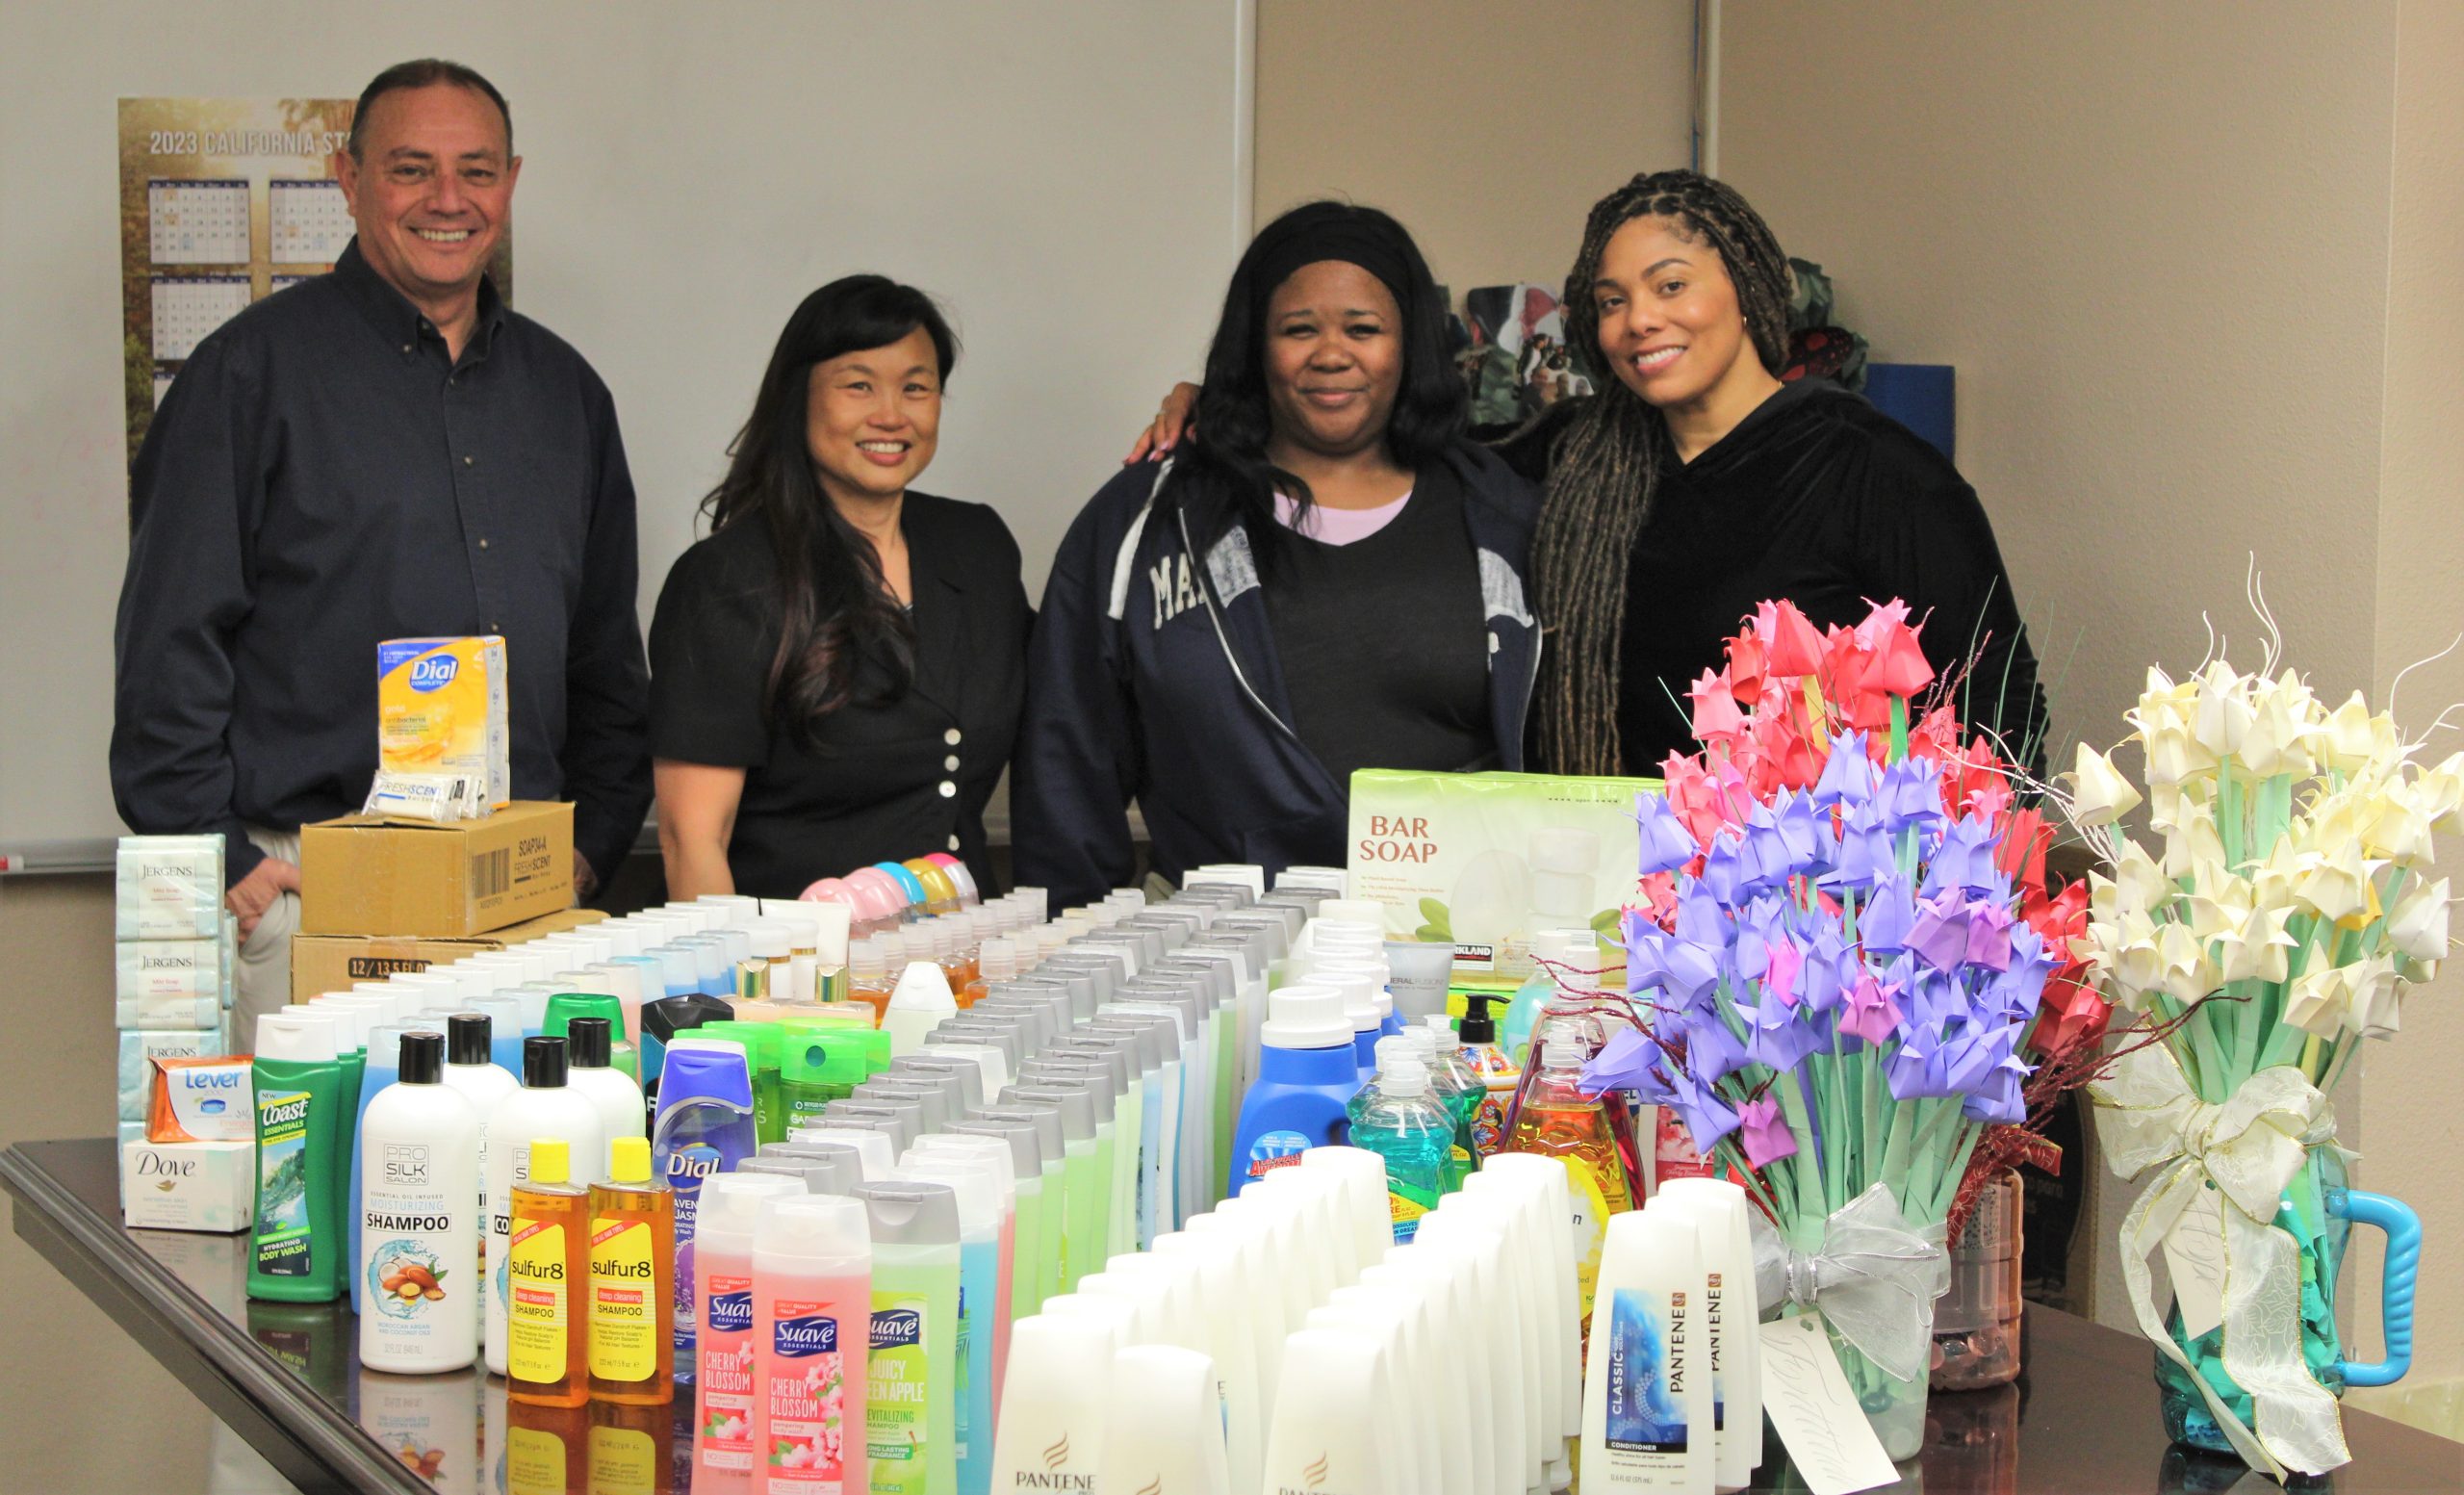 Restorative justice effort at Division of Juvenile Justice (DJJ) shows staff with a table full of different soap products to donate to women and children in need.